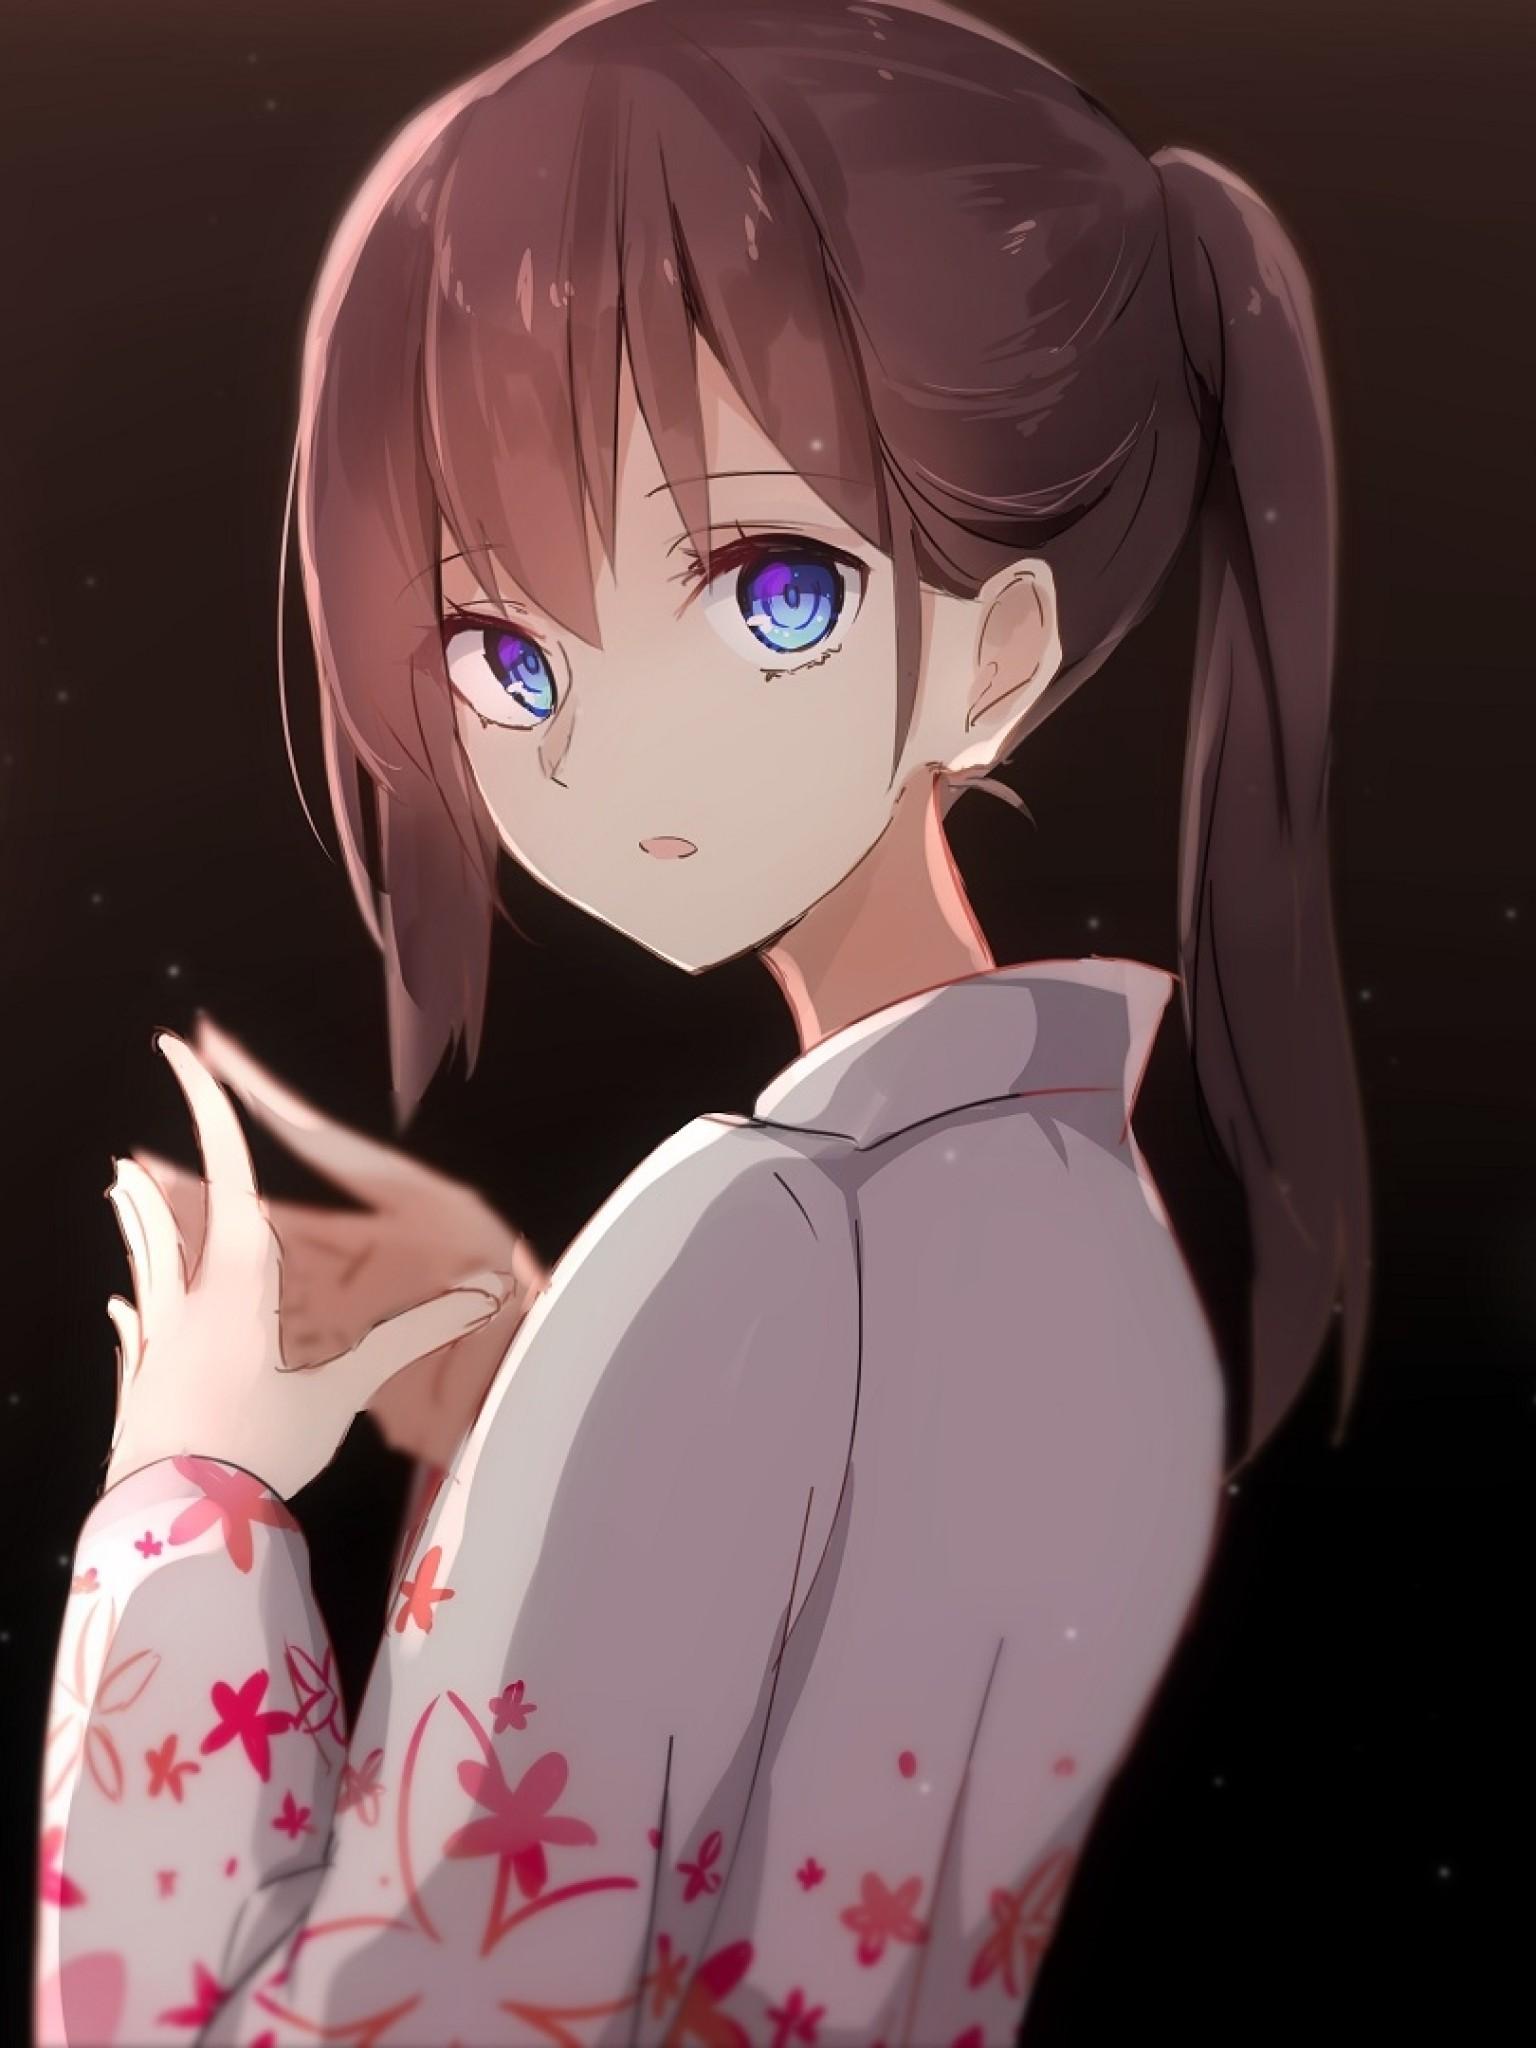 Anime girl with ponytails by AINIJI on DeviantArt